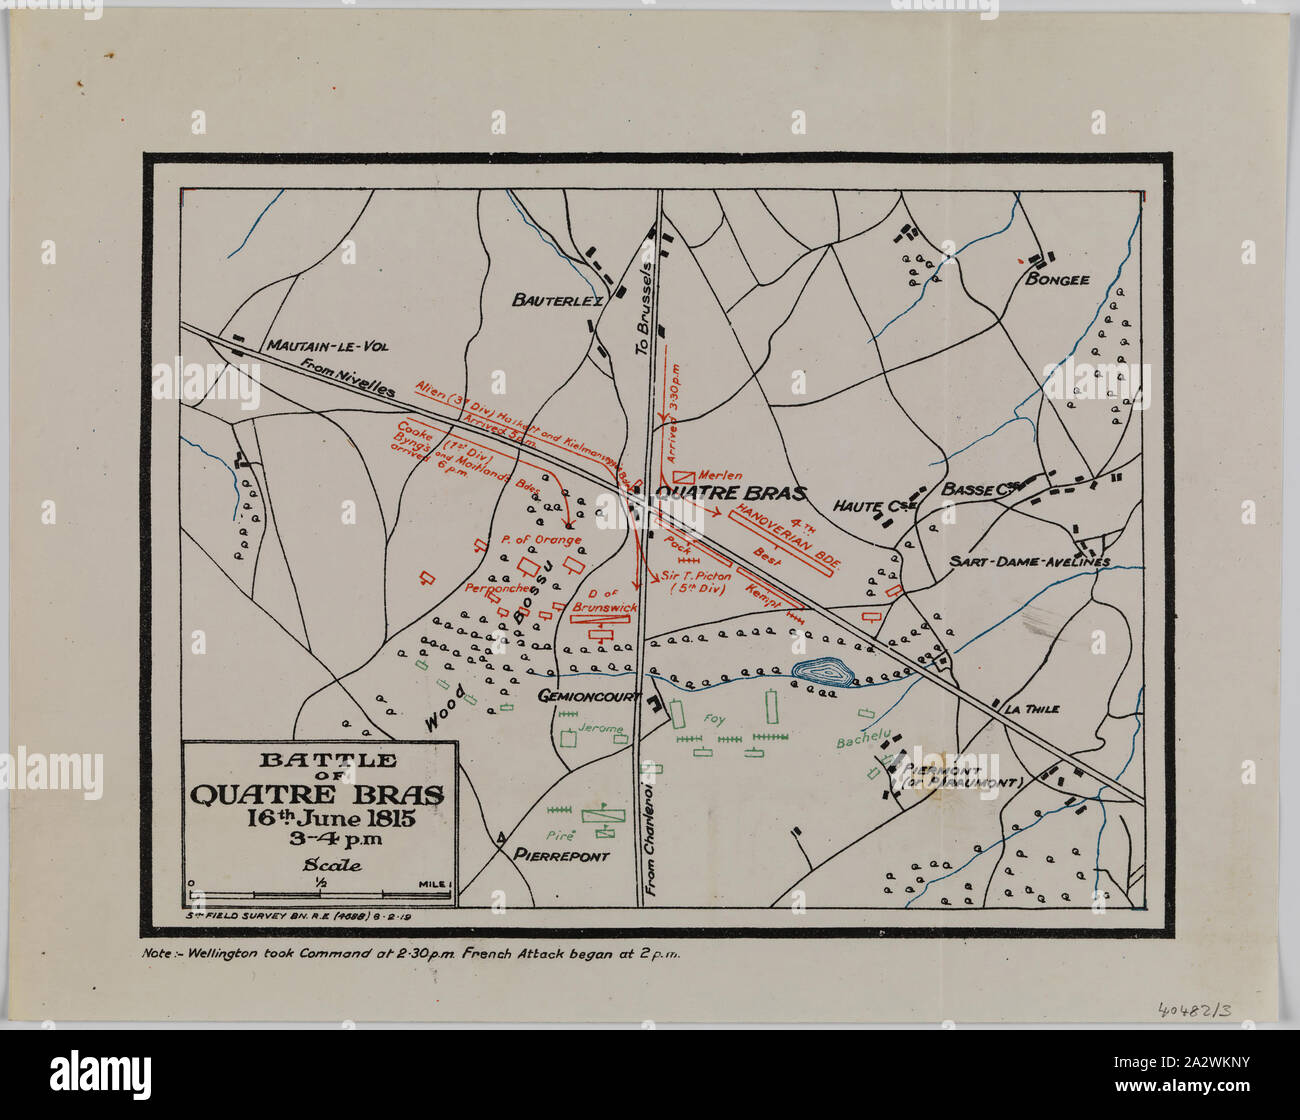 Map - Battle of Quatre Bras, Waterloo Campaign, 16 Jun 1815, 5th Field Survey, 8 Feb 1919, Map depicting the Battle of Quatre Bras, 16 June 1815. It was fought two days before the Battle of Waterloo. Part of a set of information about the Waterloo Campaign, 1815, comprising three maps, two memos and two tables, sent from the headquarters of the 4th Australian Division, to several of its units, on 15 and 16 March 1919, shortly after World War I. The maps depict the Battle of Quatre Stock Photo